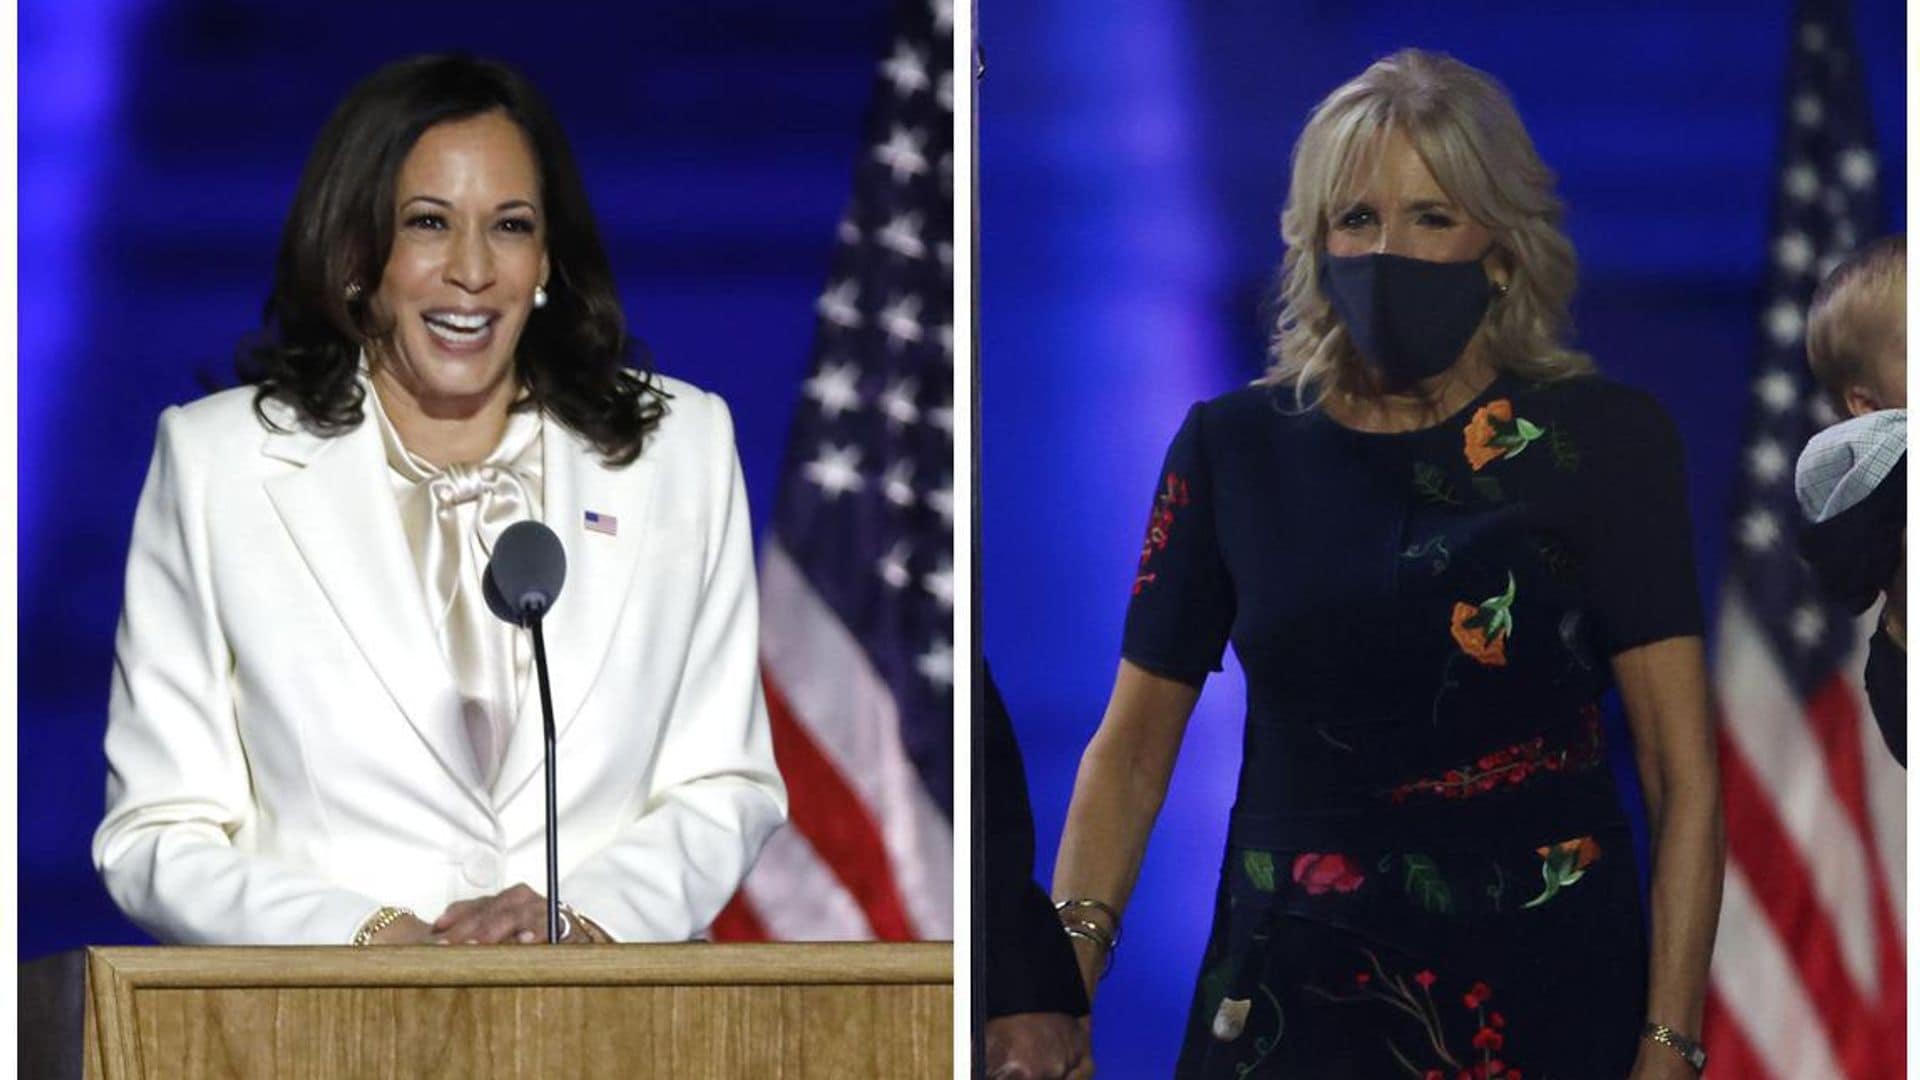 Vice President-elect Kamala Harris and First Lady Jill Biden during the drive-in rally in Wilmington, Delaware.